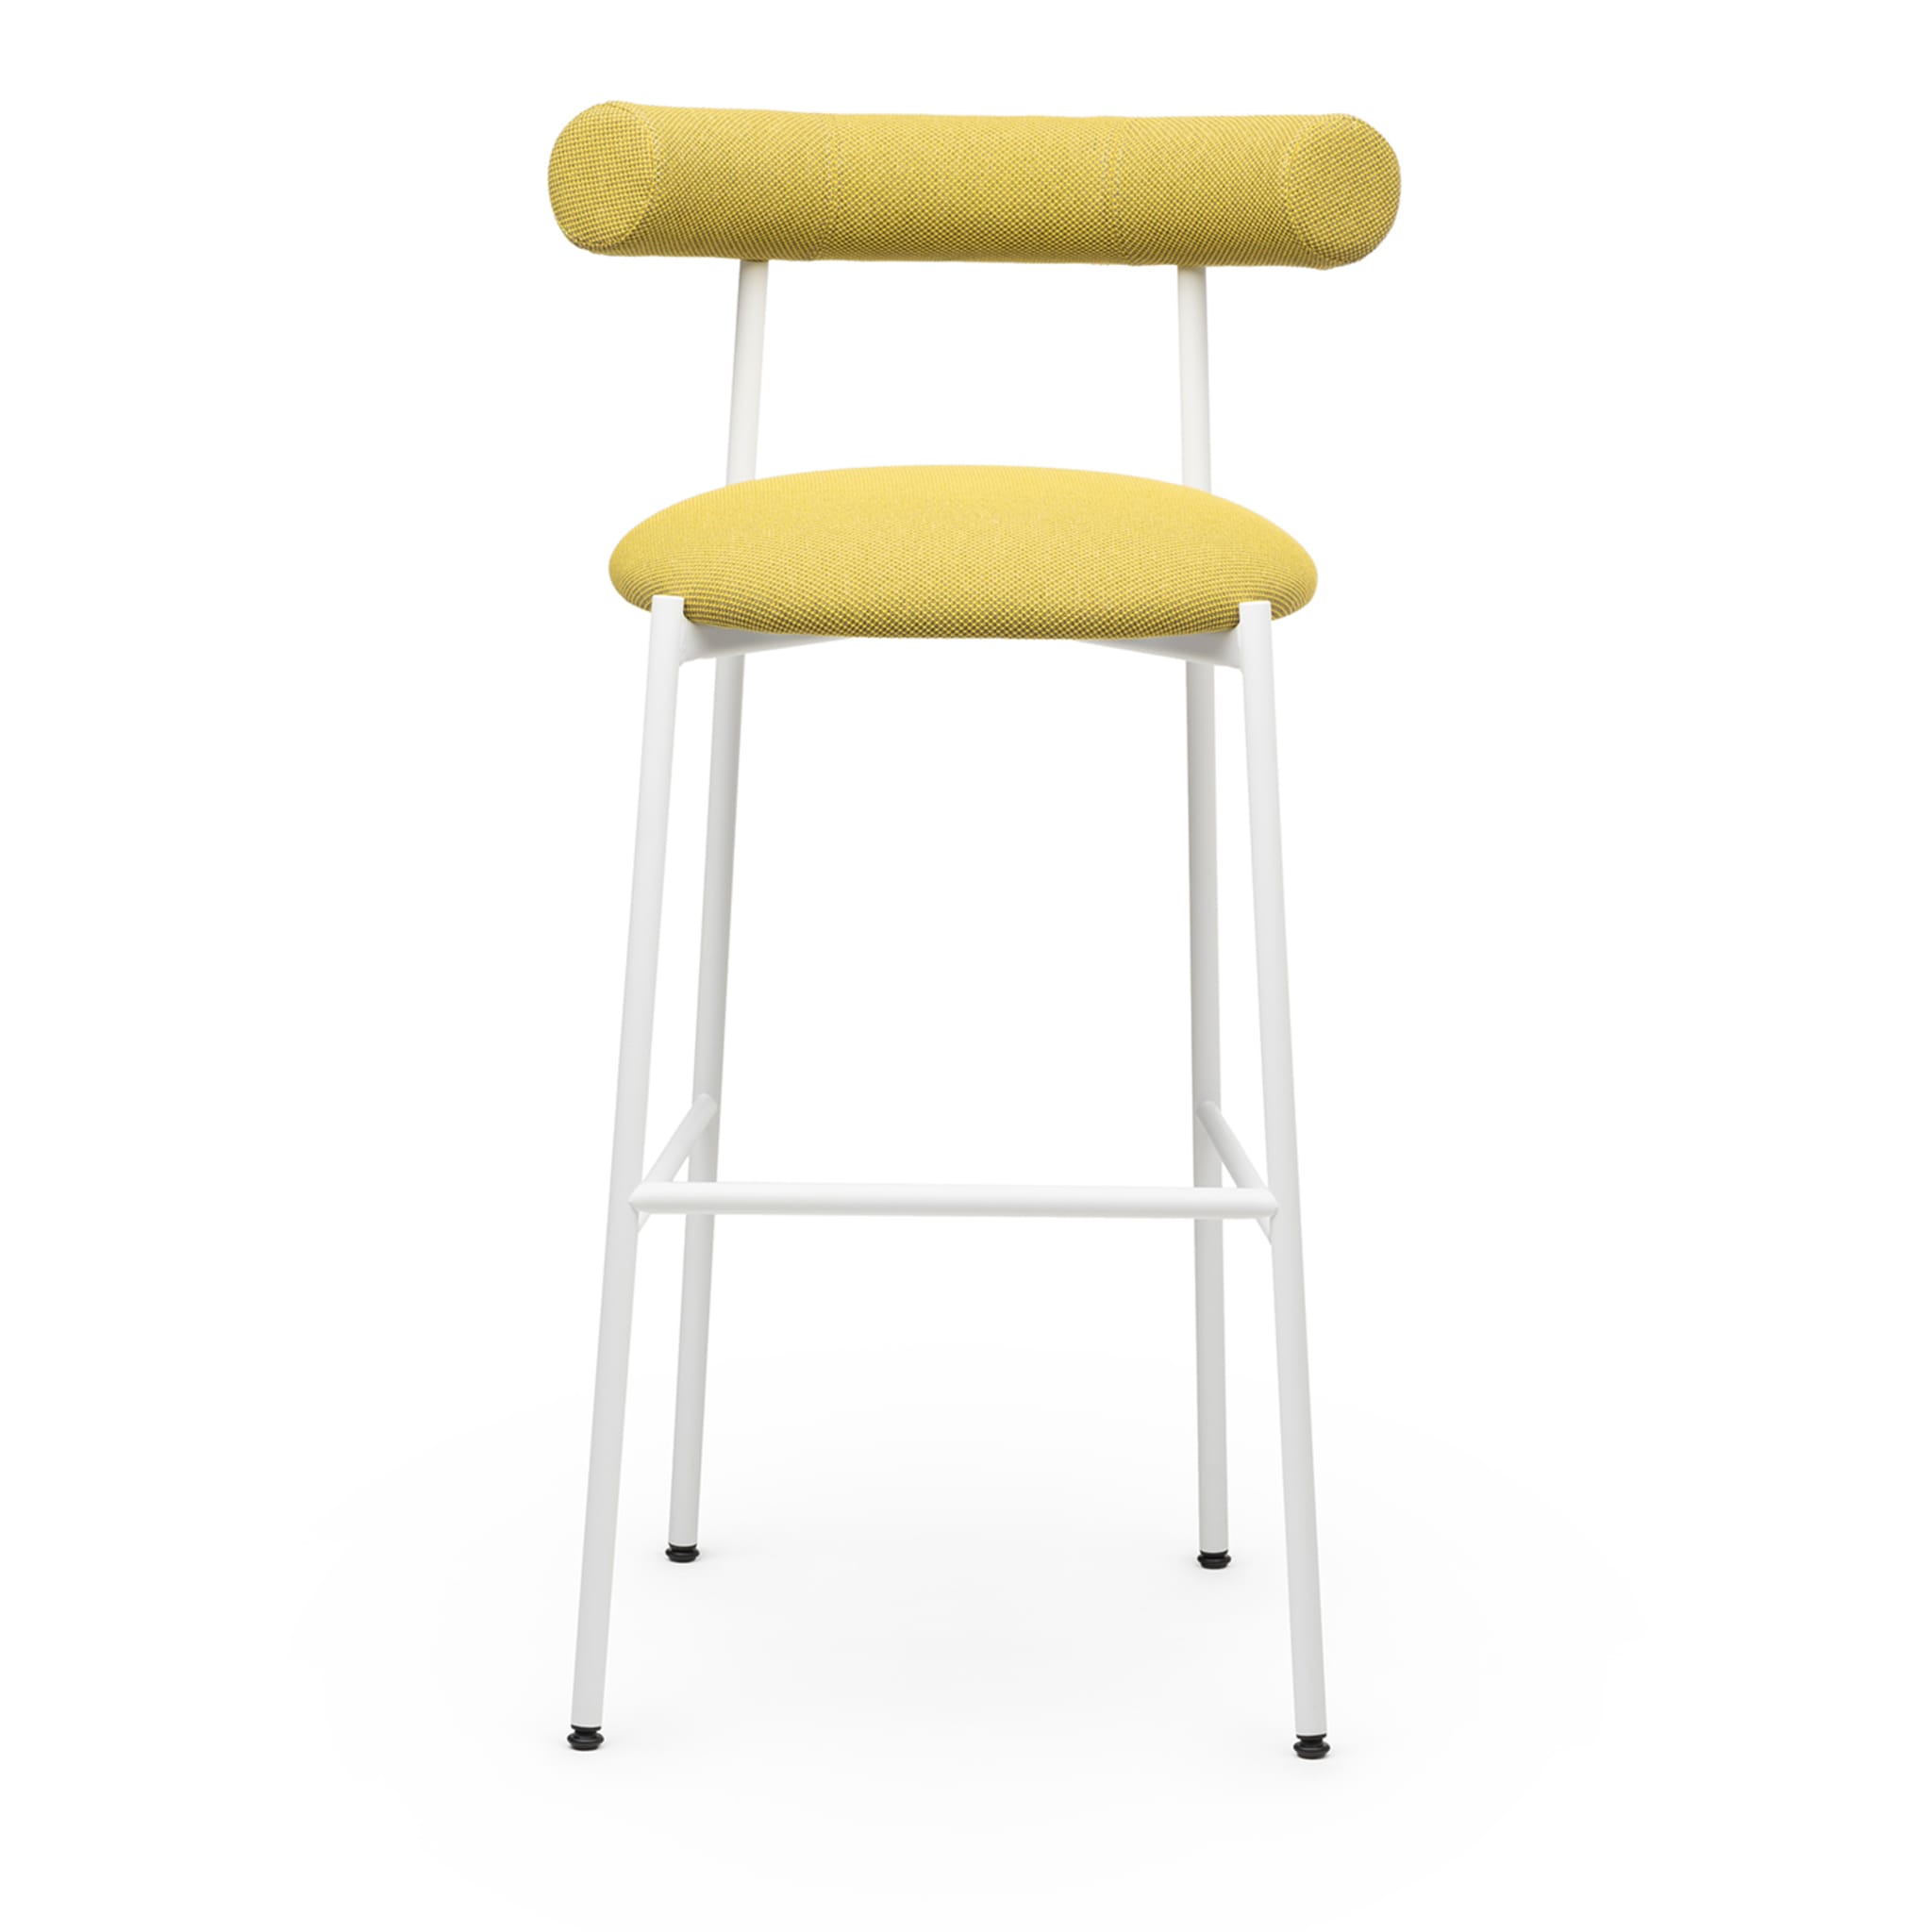 Pampa SG-80 Lime-Green & White Stool by Studio Pastina - Alternative view 1